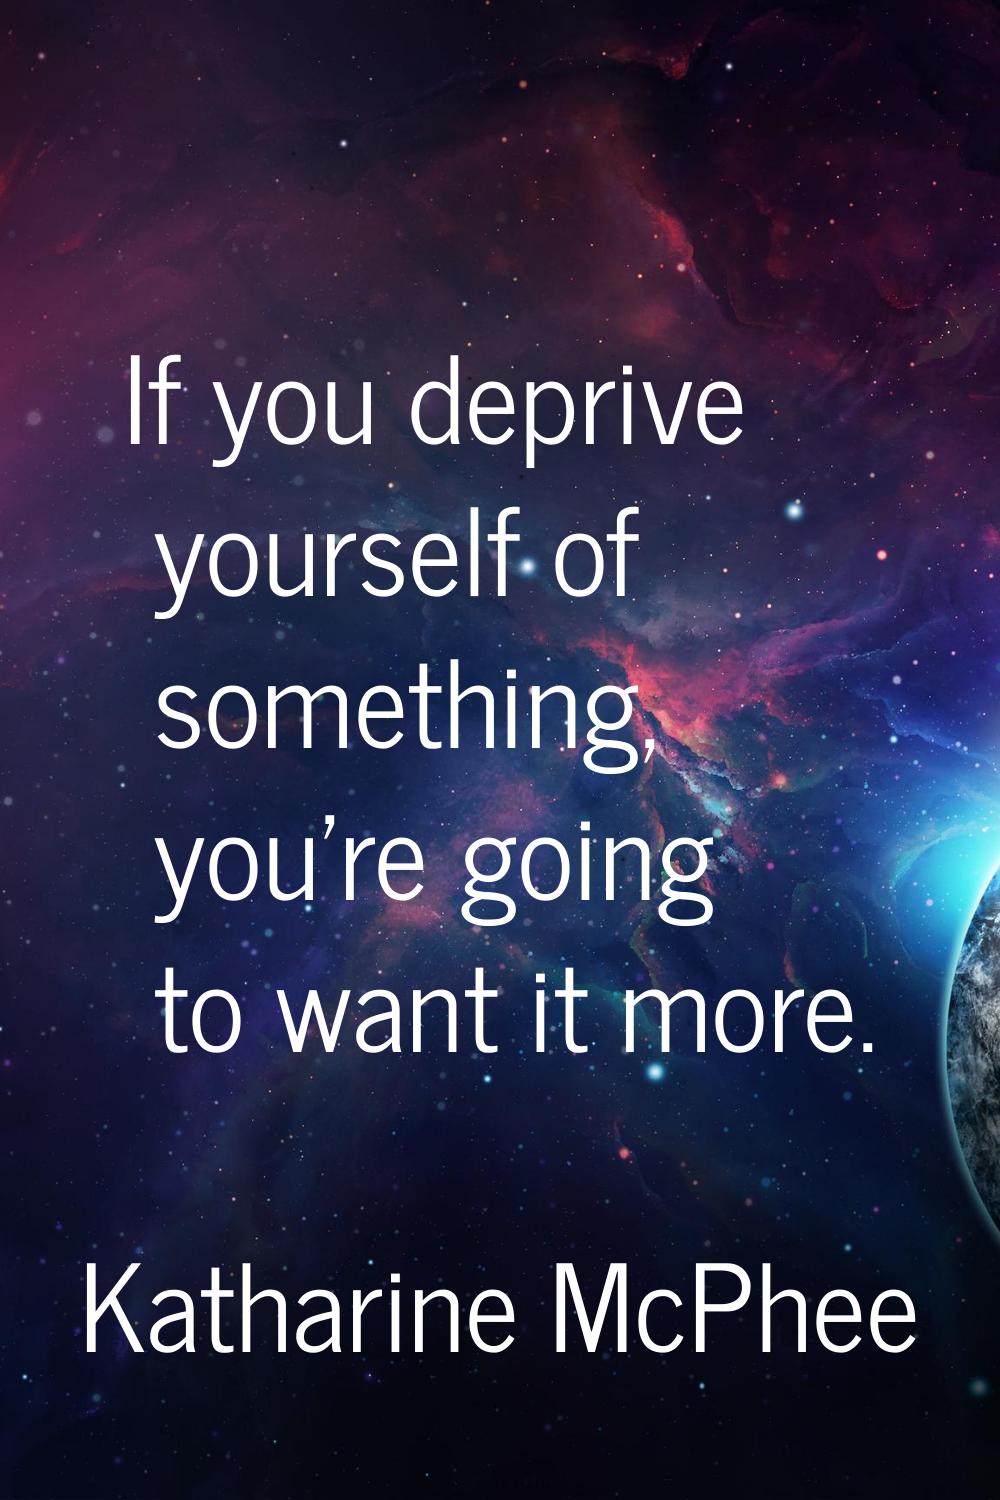 If you deprive yourself of something, you're going to want it more.